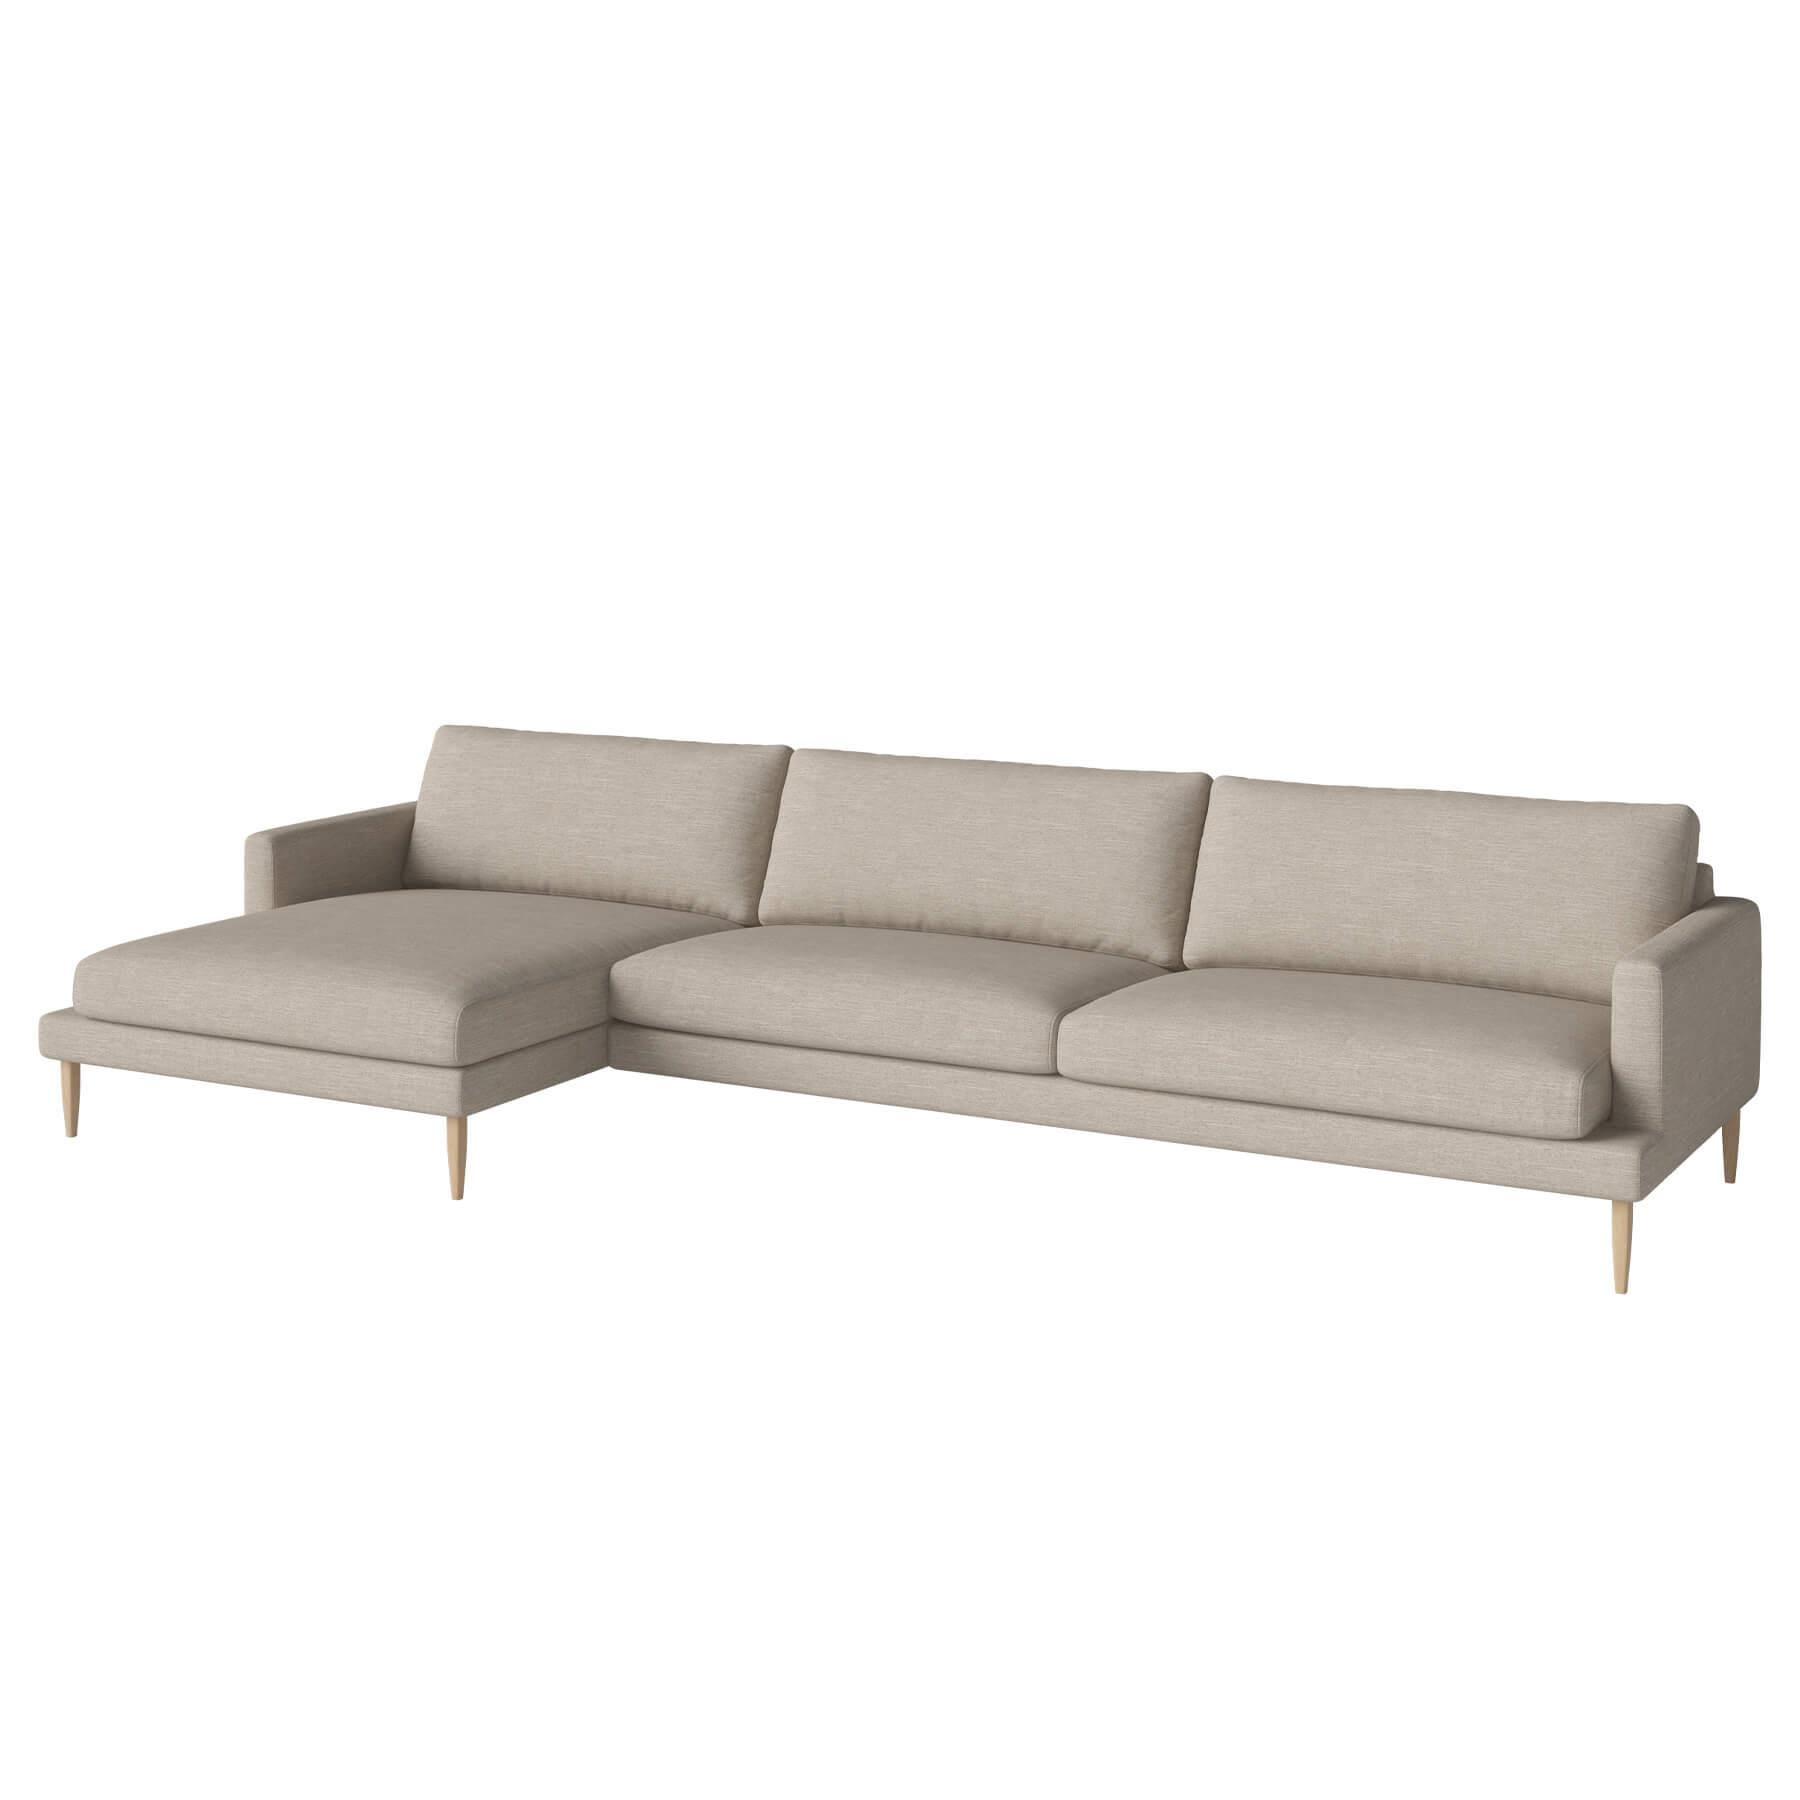 Bolia Veneda Sofa 45 Seater Sofa With Chaise Longue White Oiled Oak Baize Sand Left Brown Designer Furniture From Holloways Of Ludlow